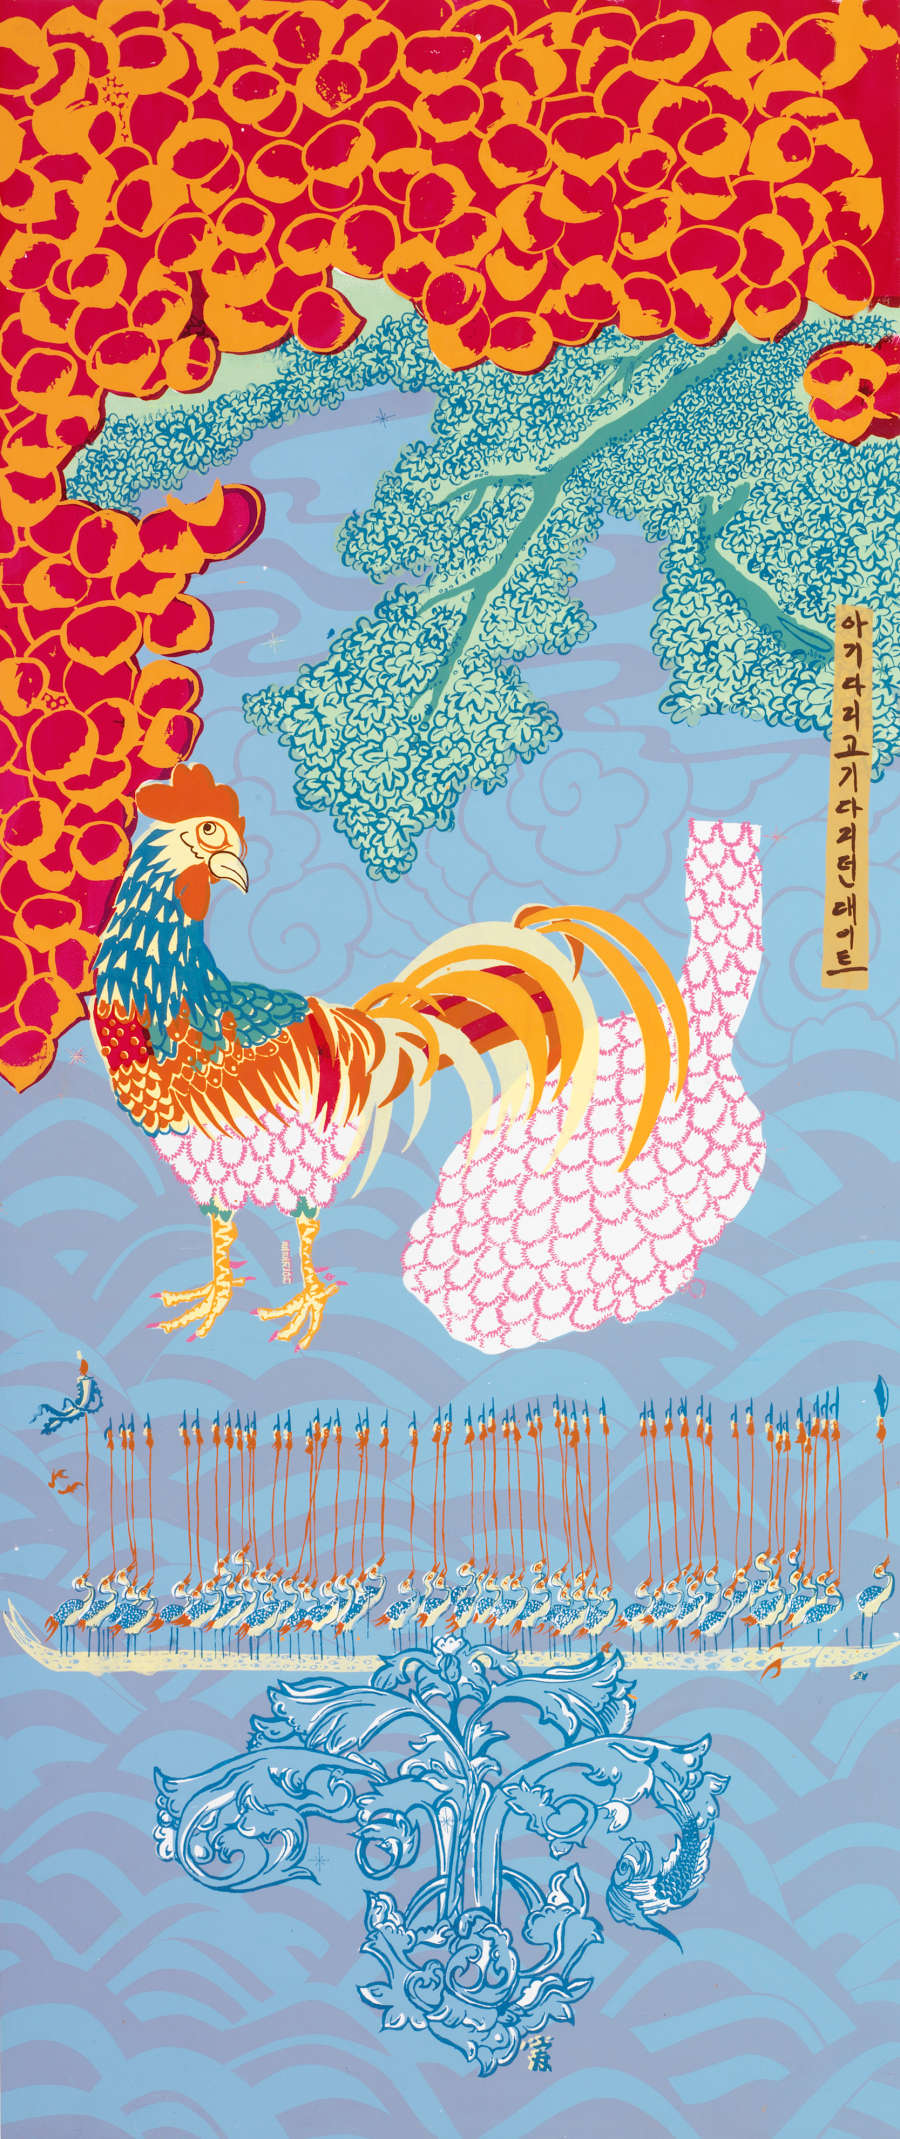 Print of a vibrant, multi-patterned chicken against a blue and purple background, above an army of birds with swords, and below an orange and red circular pattern overlapping leafy linework. 